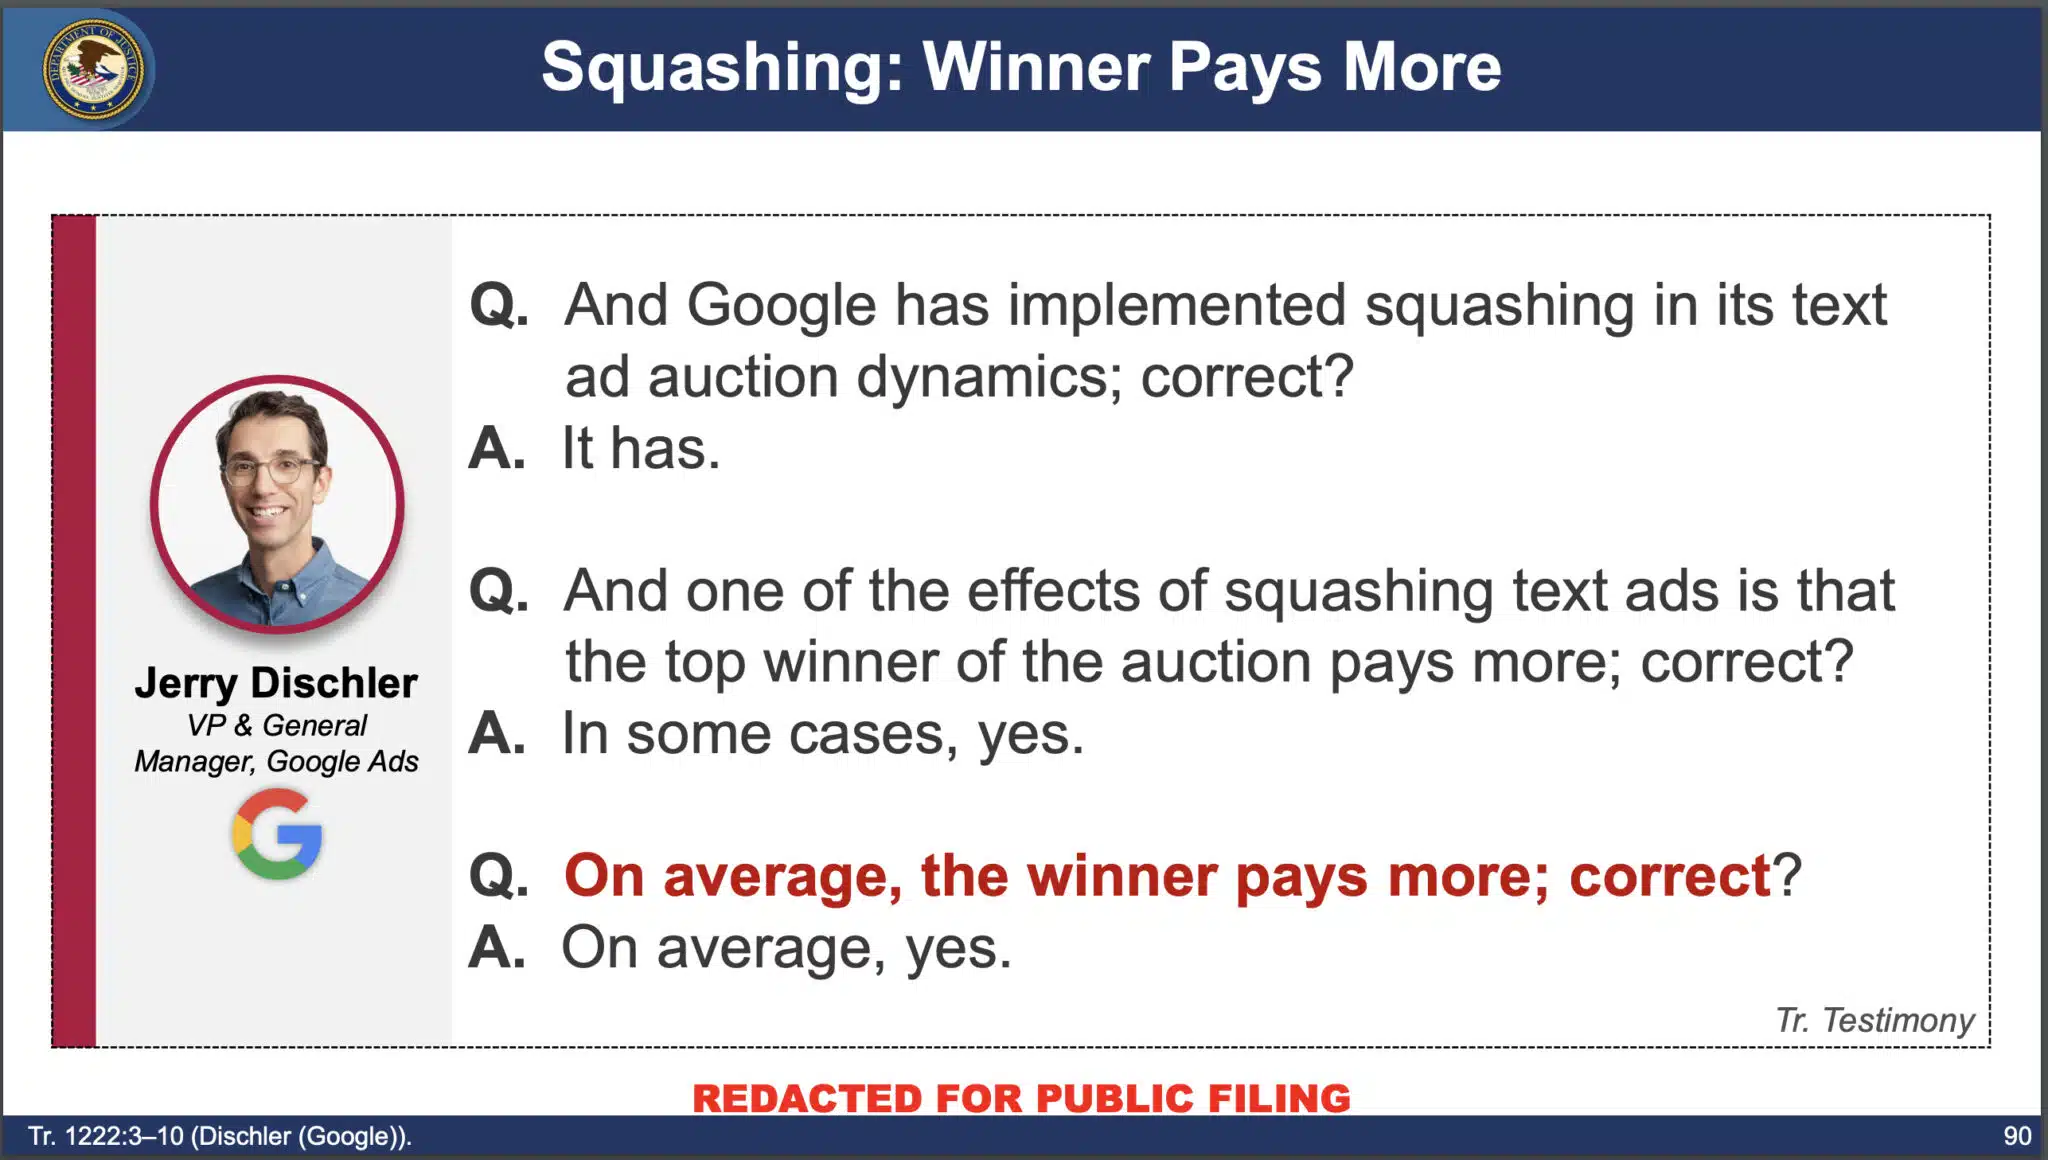 Google Squashing winner pays more at scale